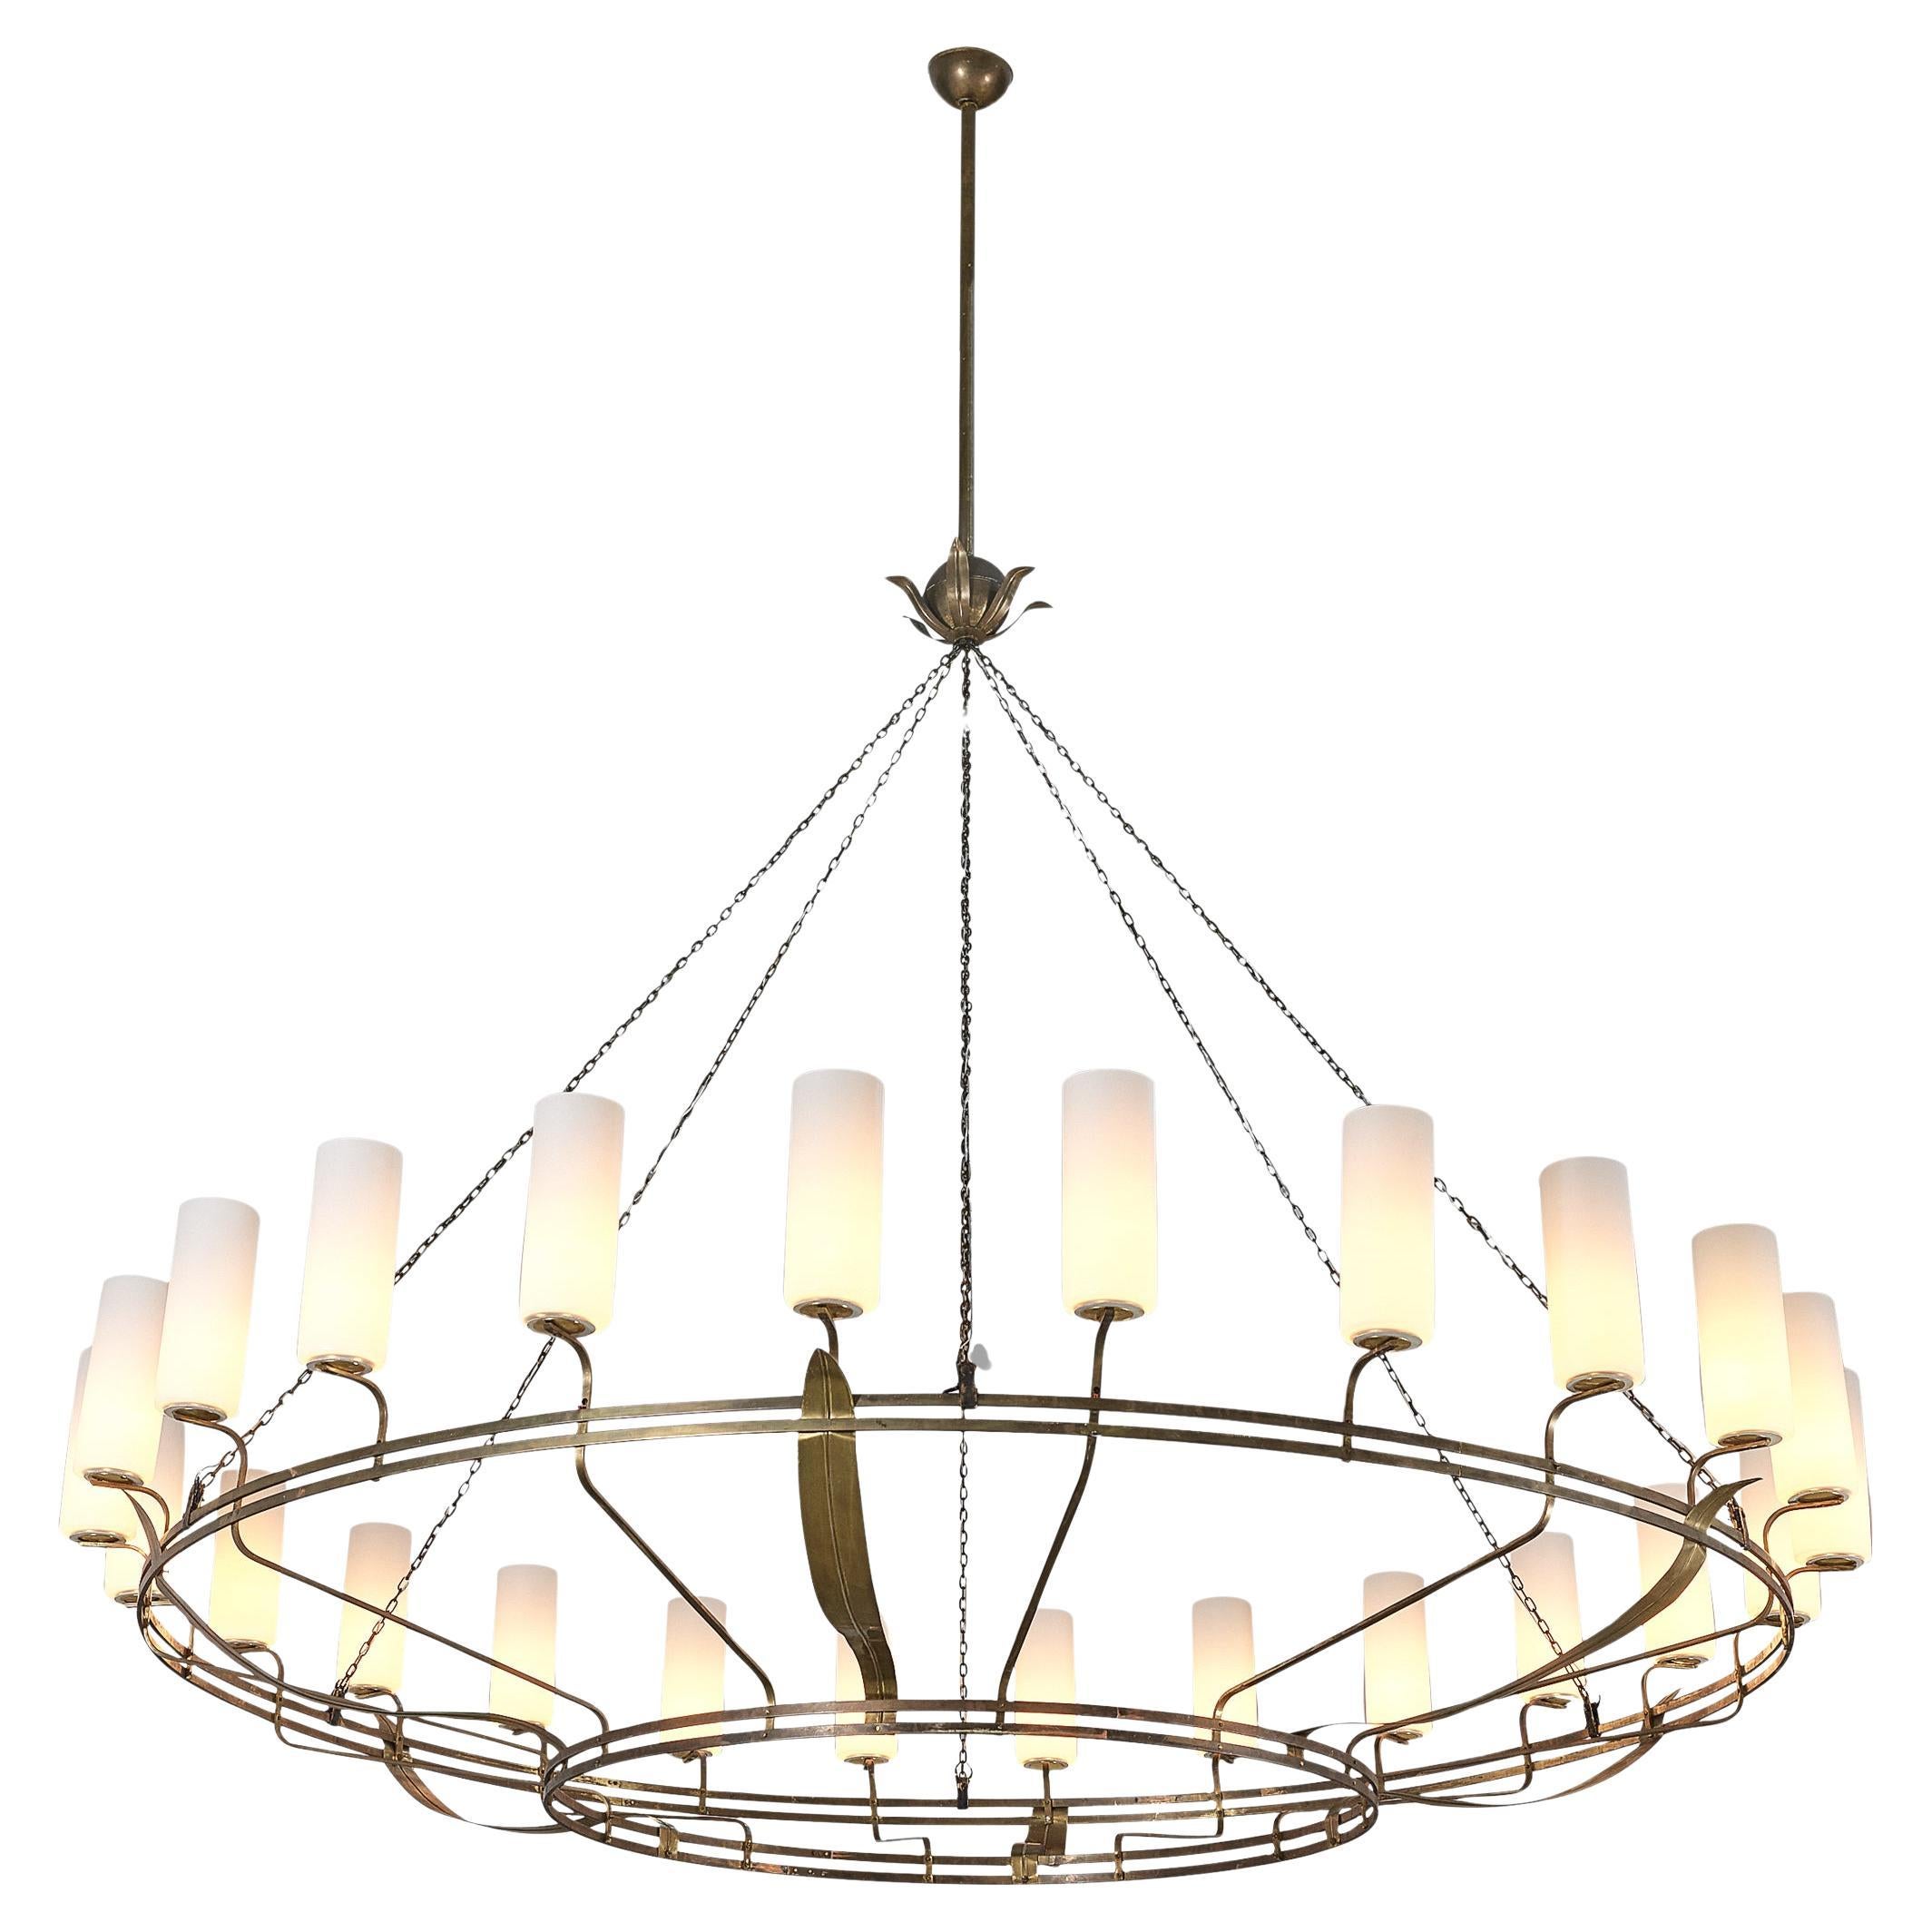 Large Chandelier with Decorative Elements in Brass and Opaline Glass